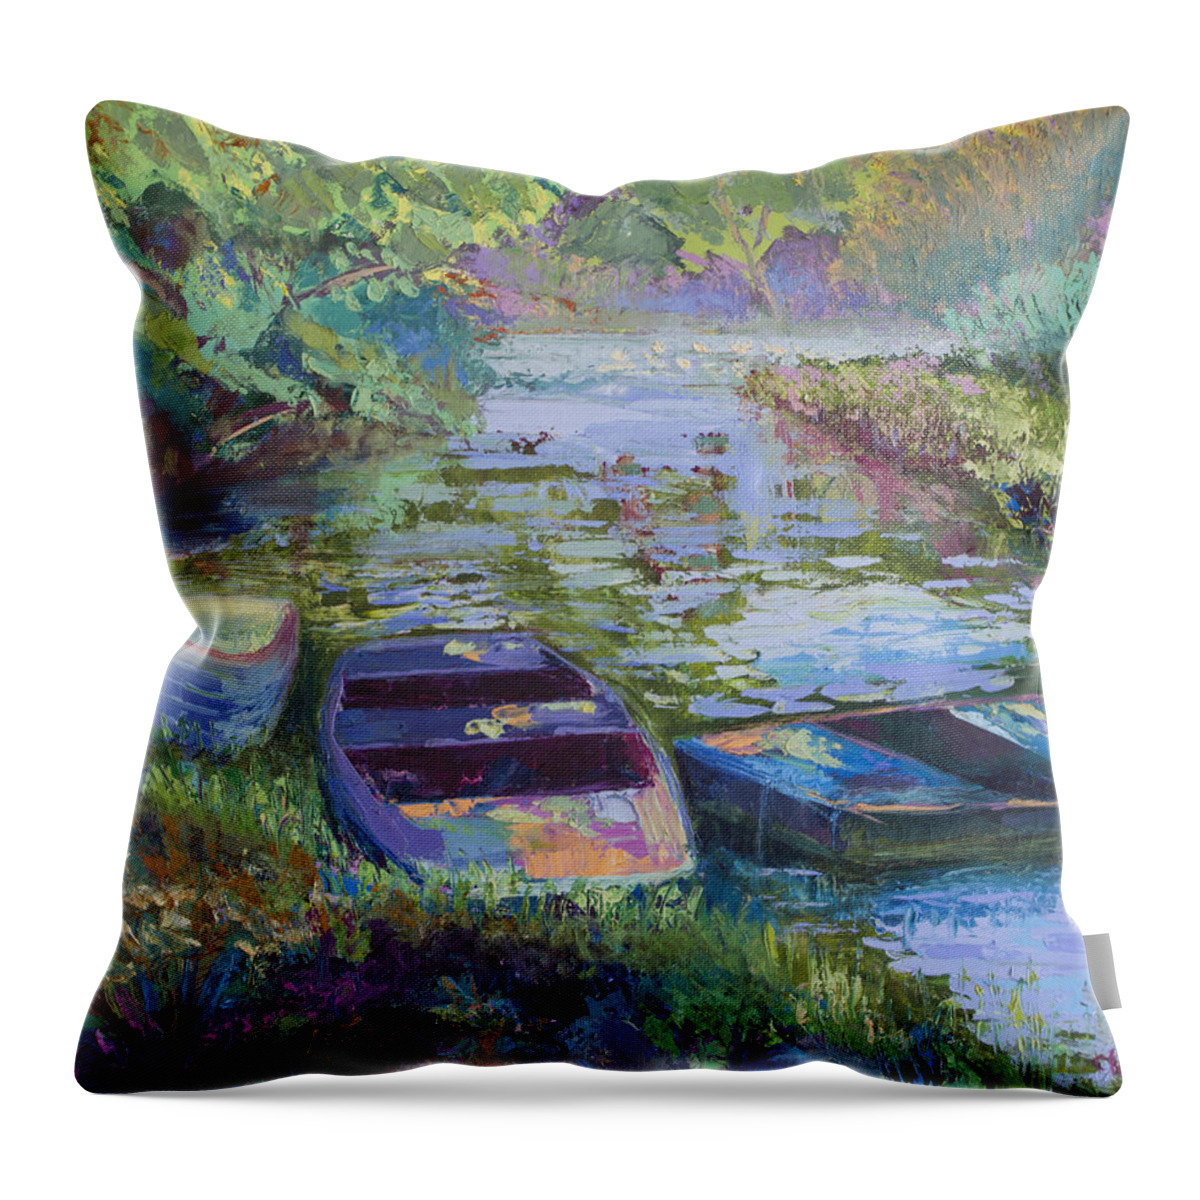 Blue Throw Pillow featuring the painting Blue Pond by Cynthia McLean